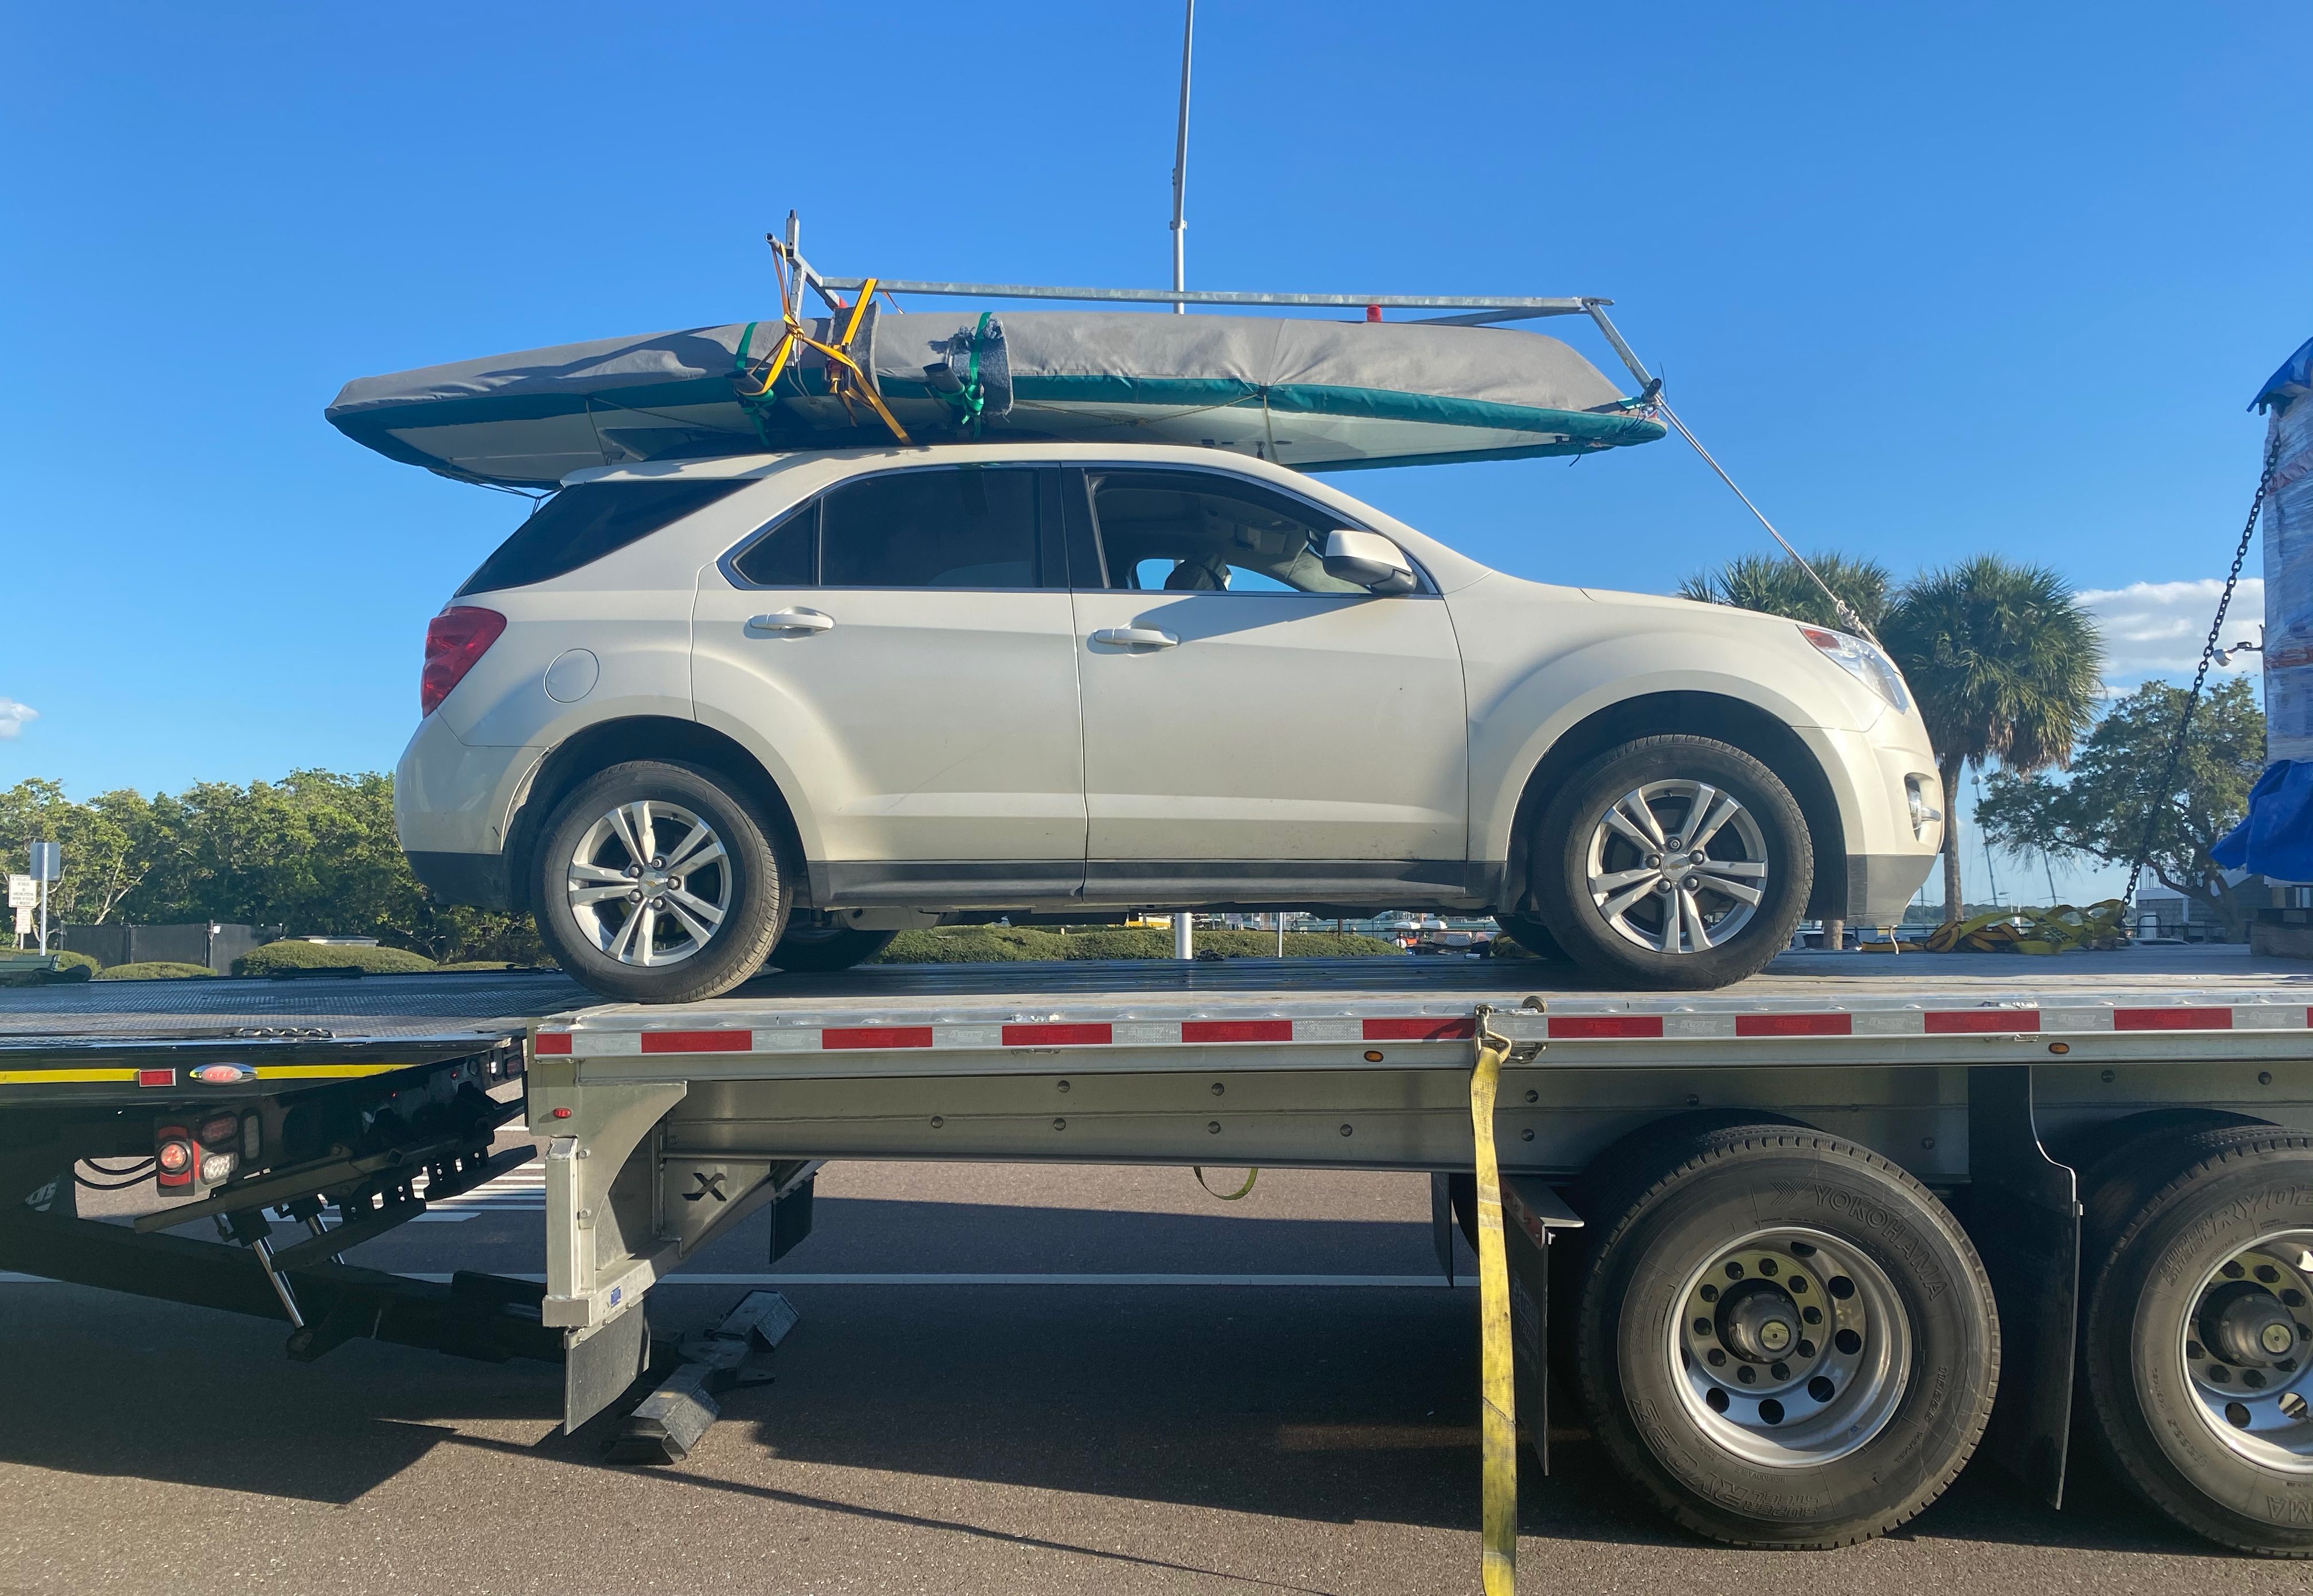 Car with boat on roof rack